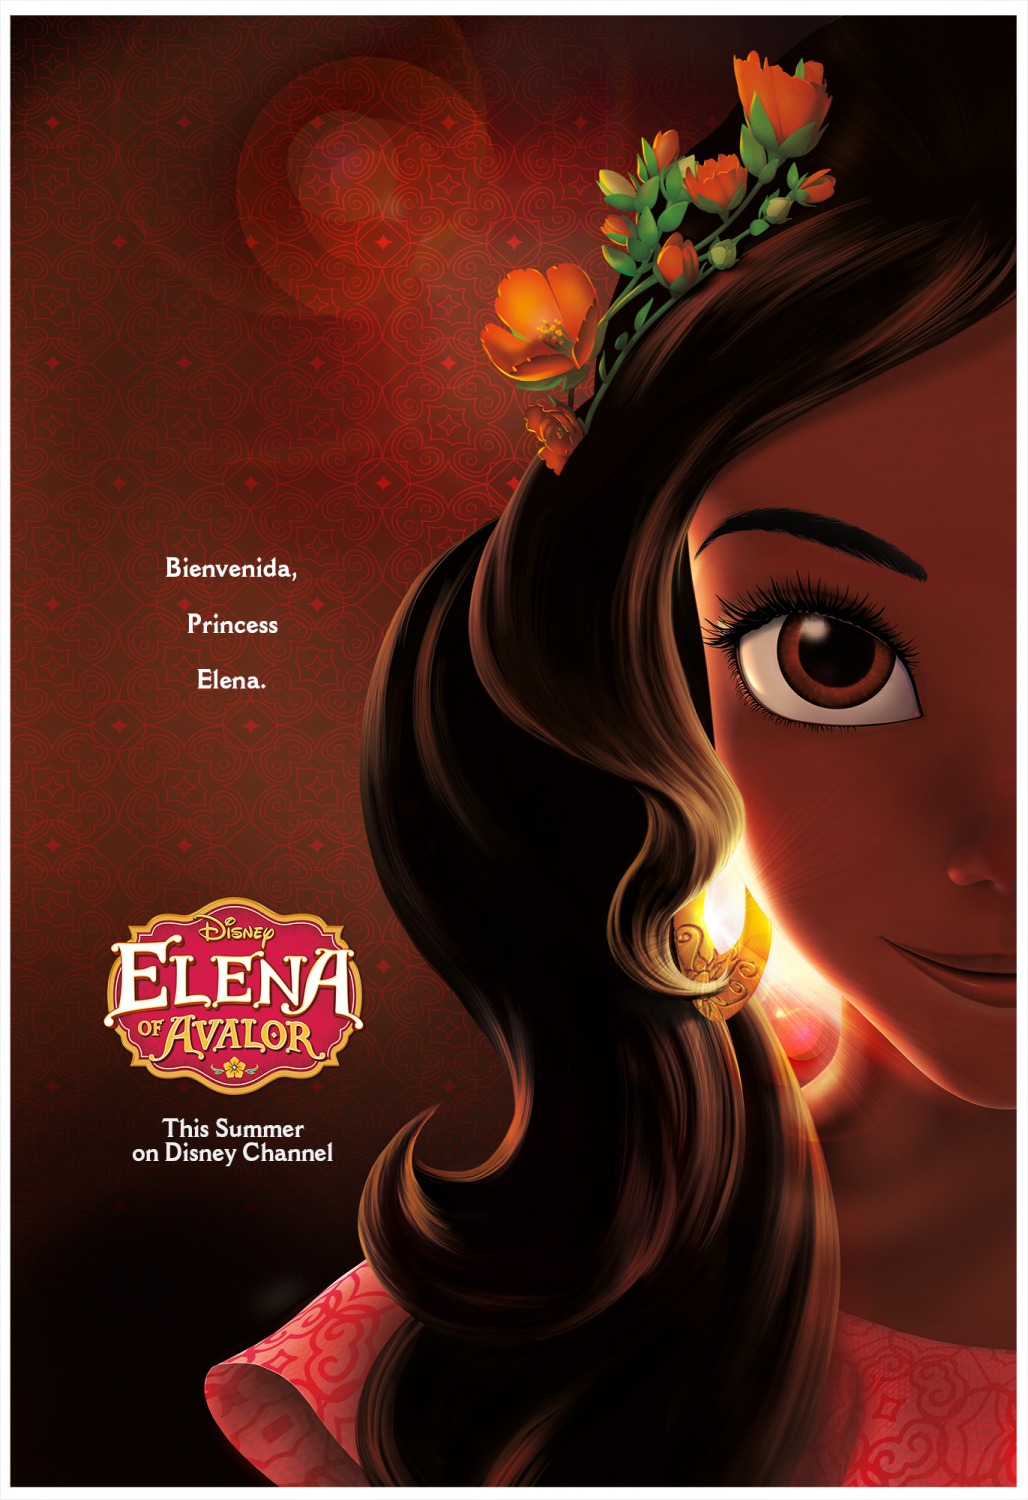 Extra Large TV Poster Image for Elena of Avalor (#2 of 4)